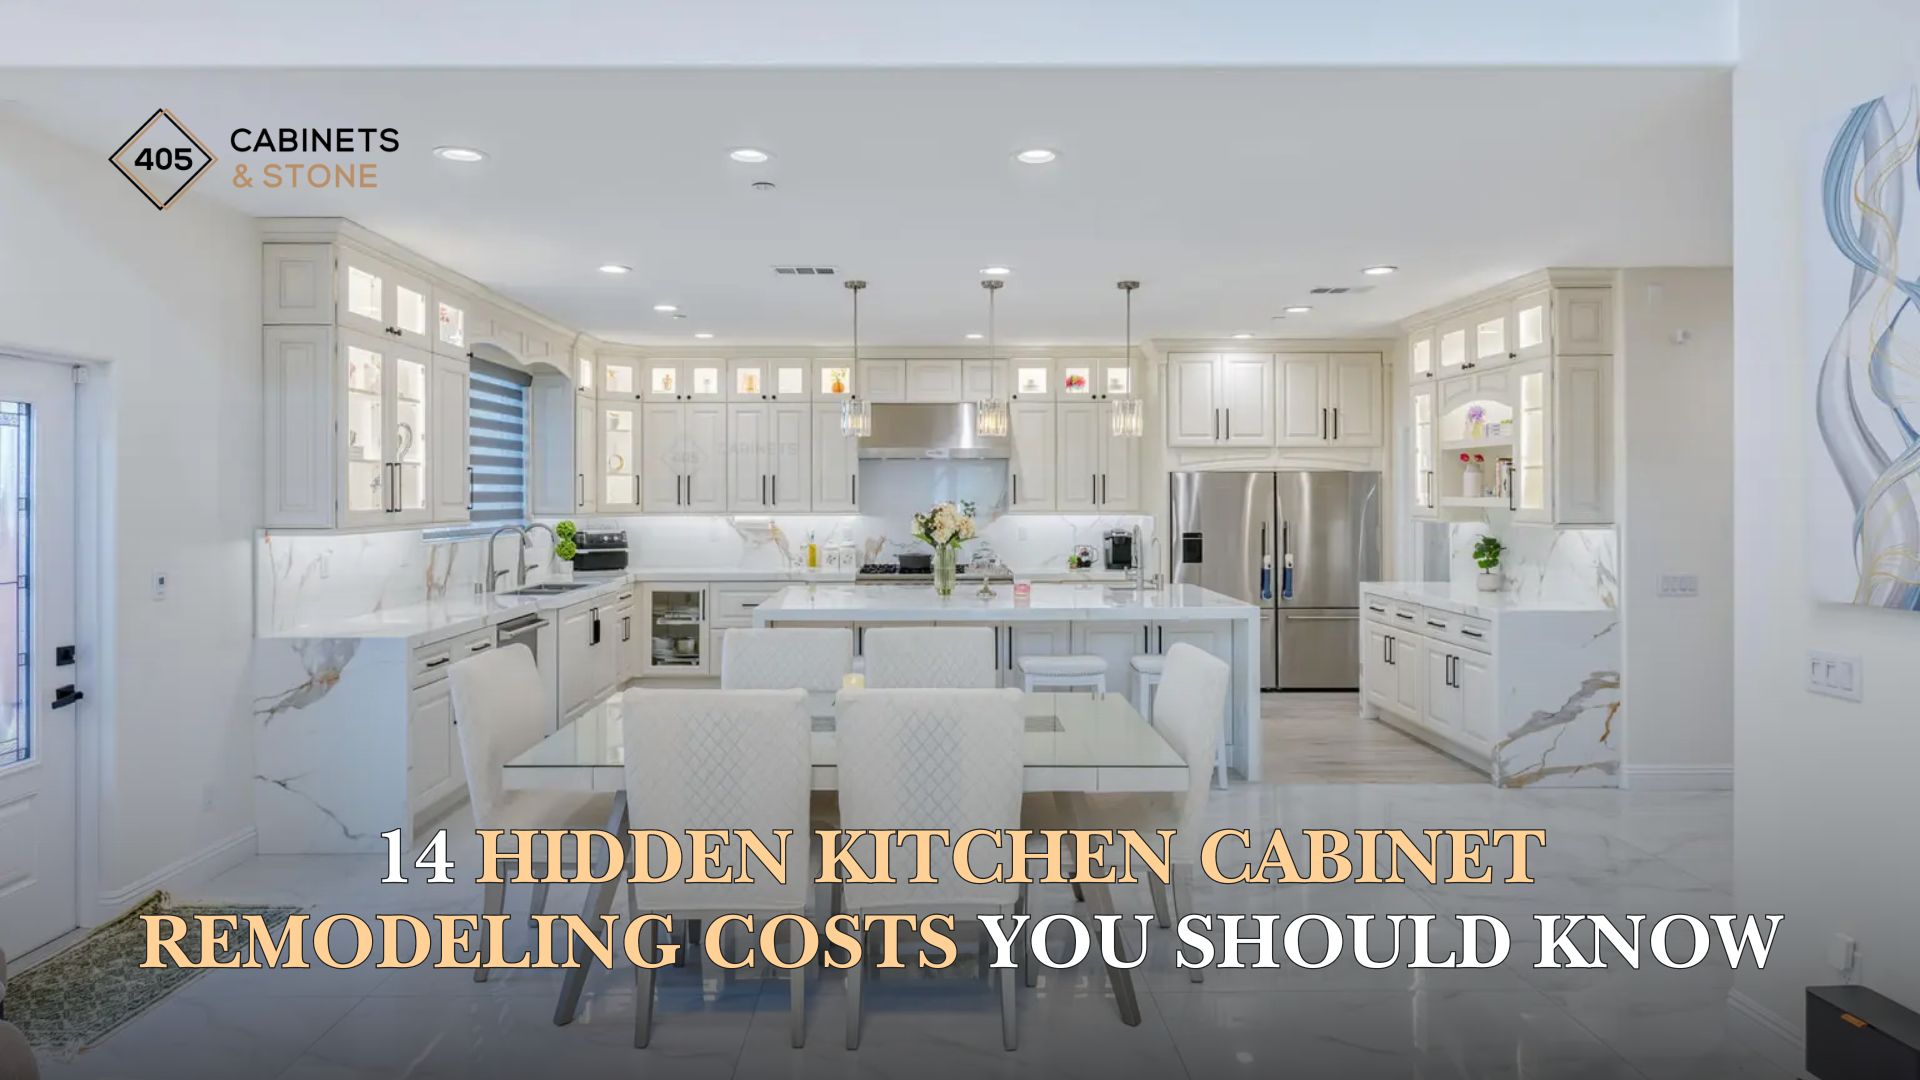 14 Hidden Kitchen Cabinet Remodeling Costs You Should Know